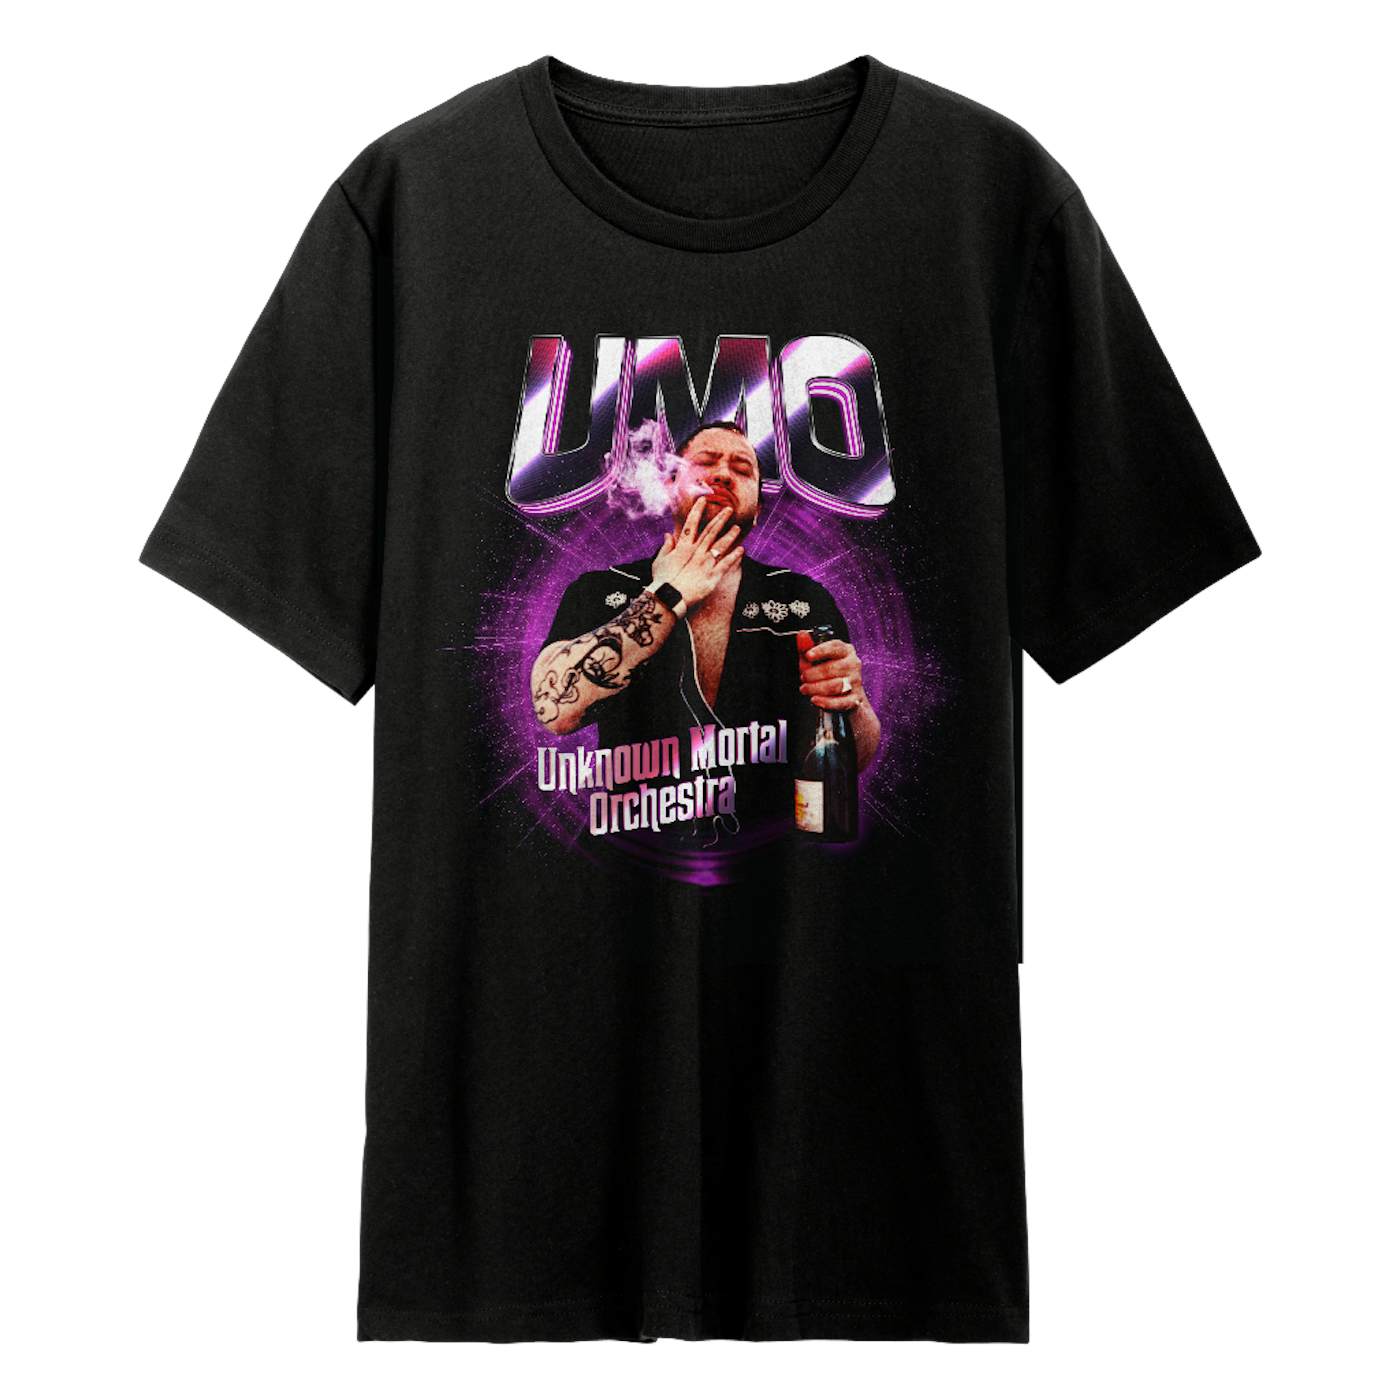 Unknown Mortal Orchestra Wrestling T-Shirt